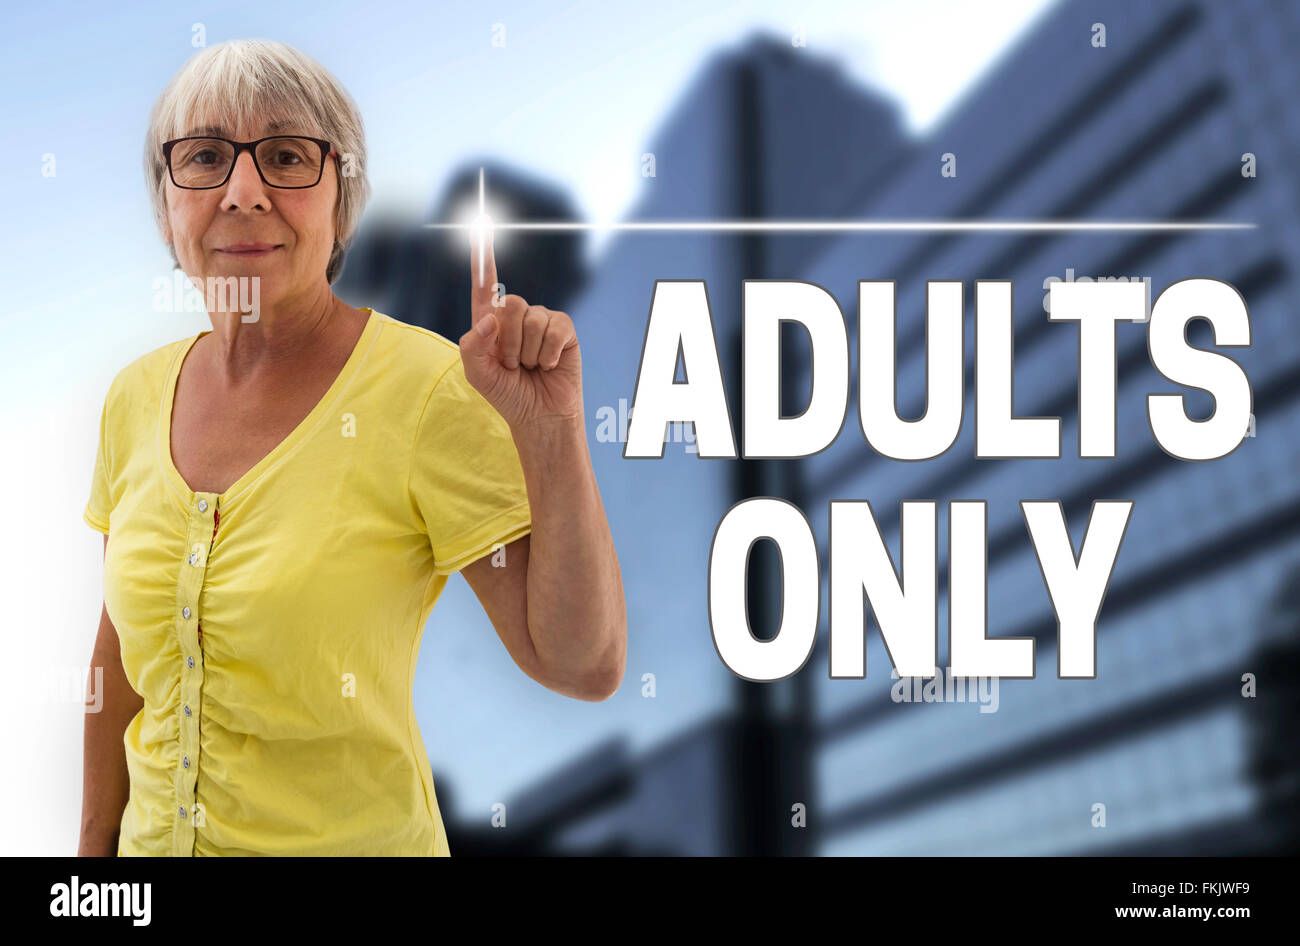 adults only touchscreen is shown by senior. Stock Photo